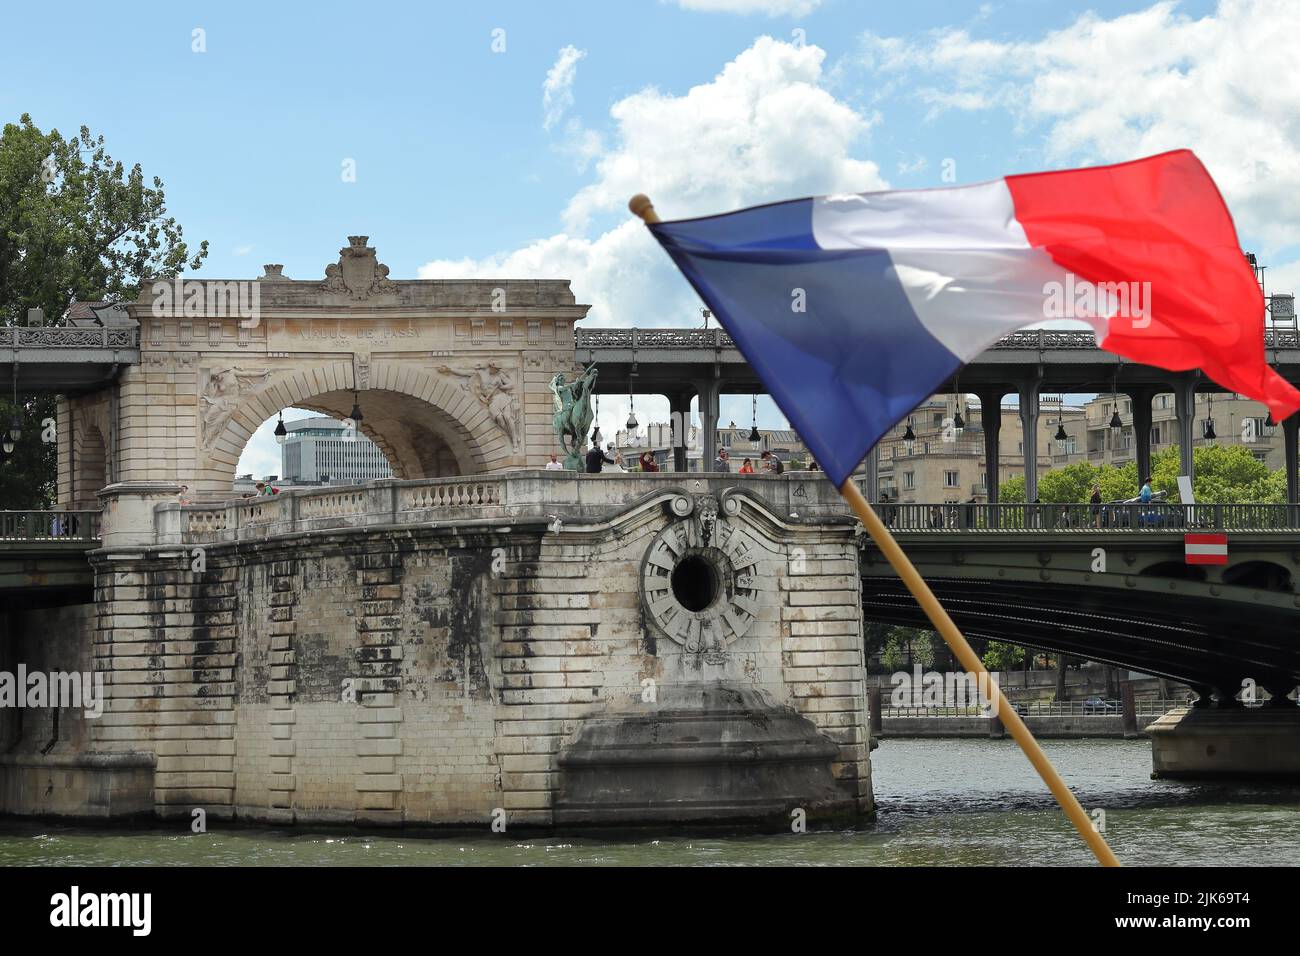 View of the Viaduc de Passy on Bir Hakeim bridge with French flag in the foreground Stock Photo